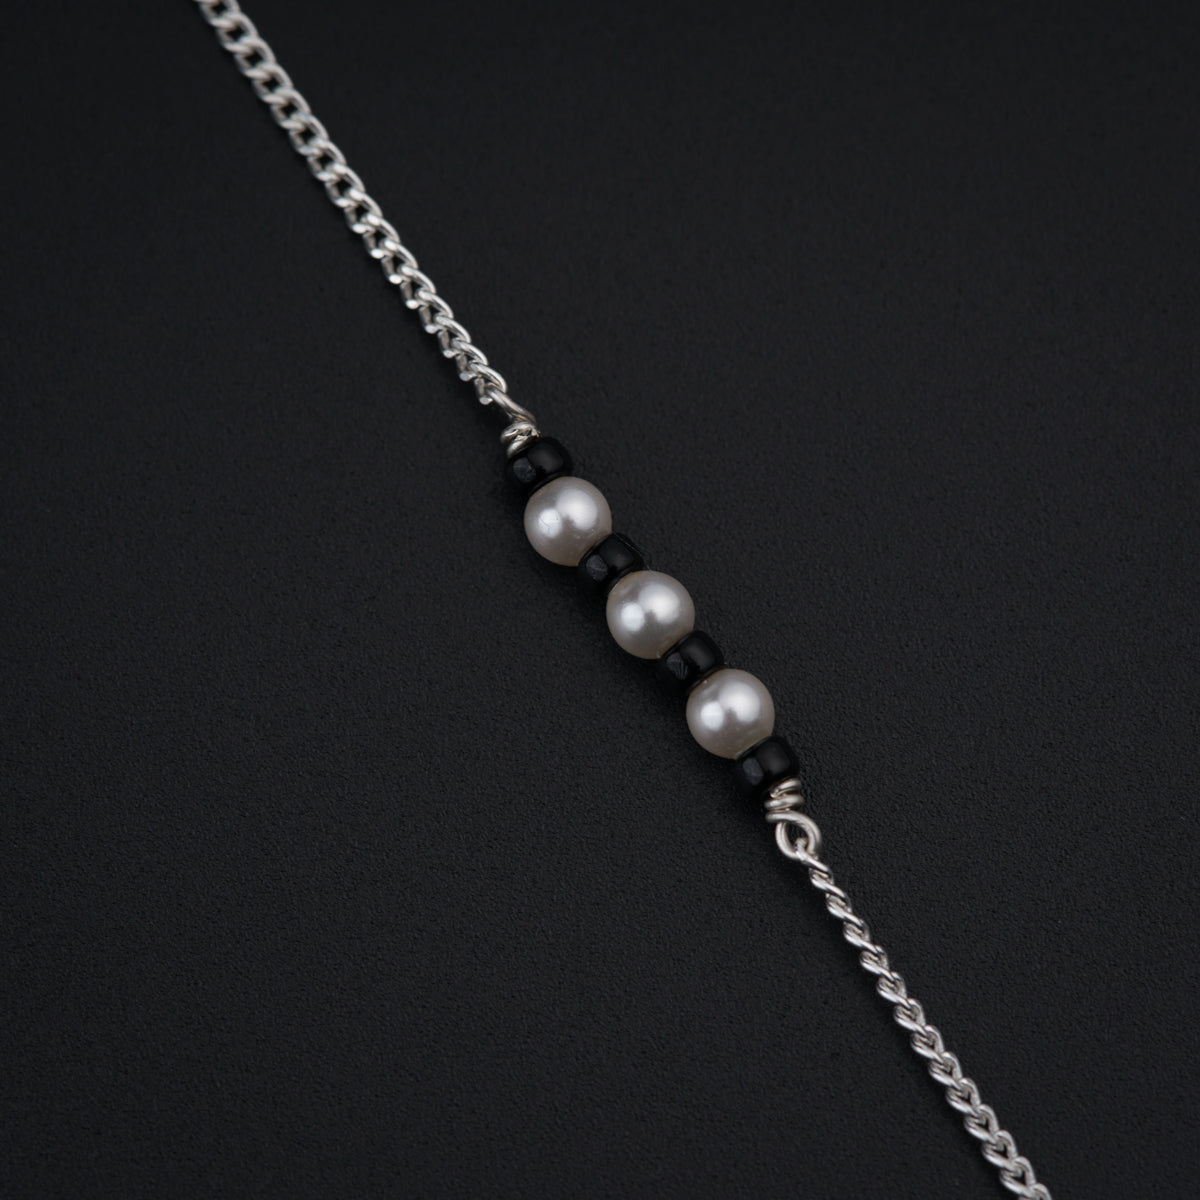 a necklace with three pearls on a chain